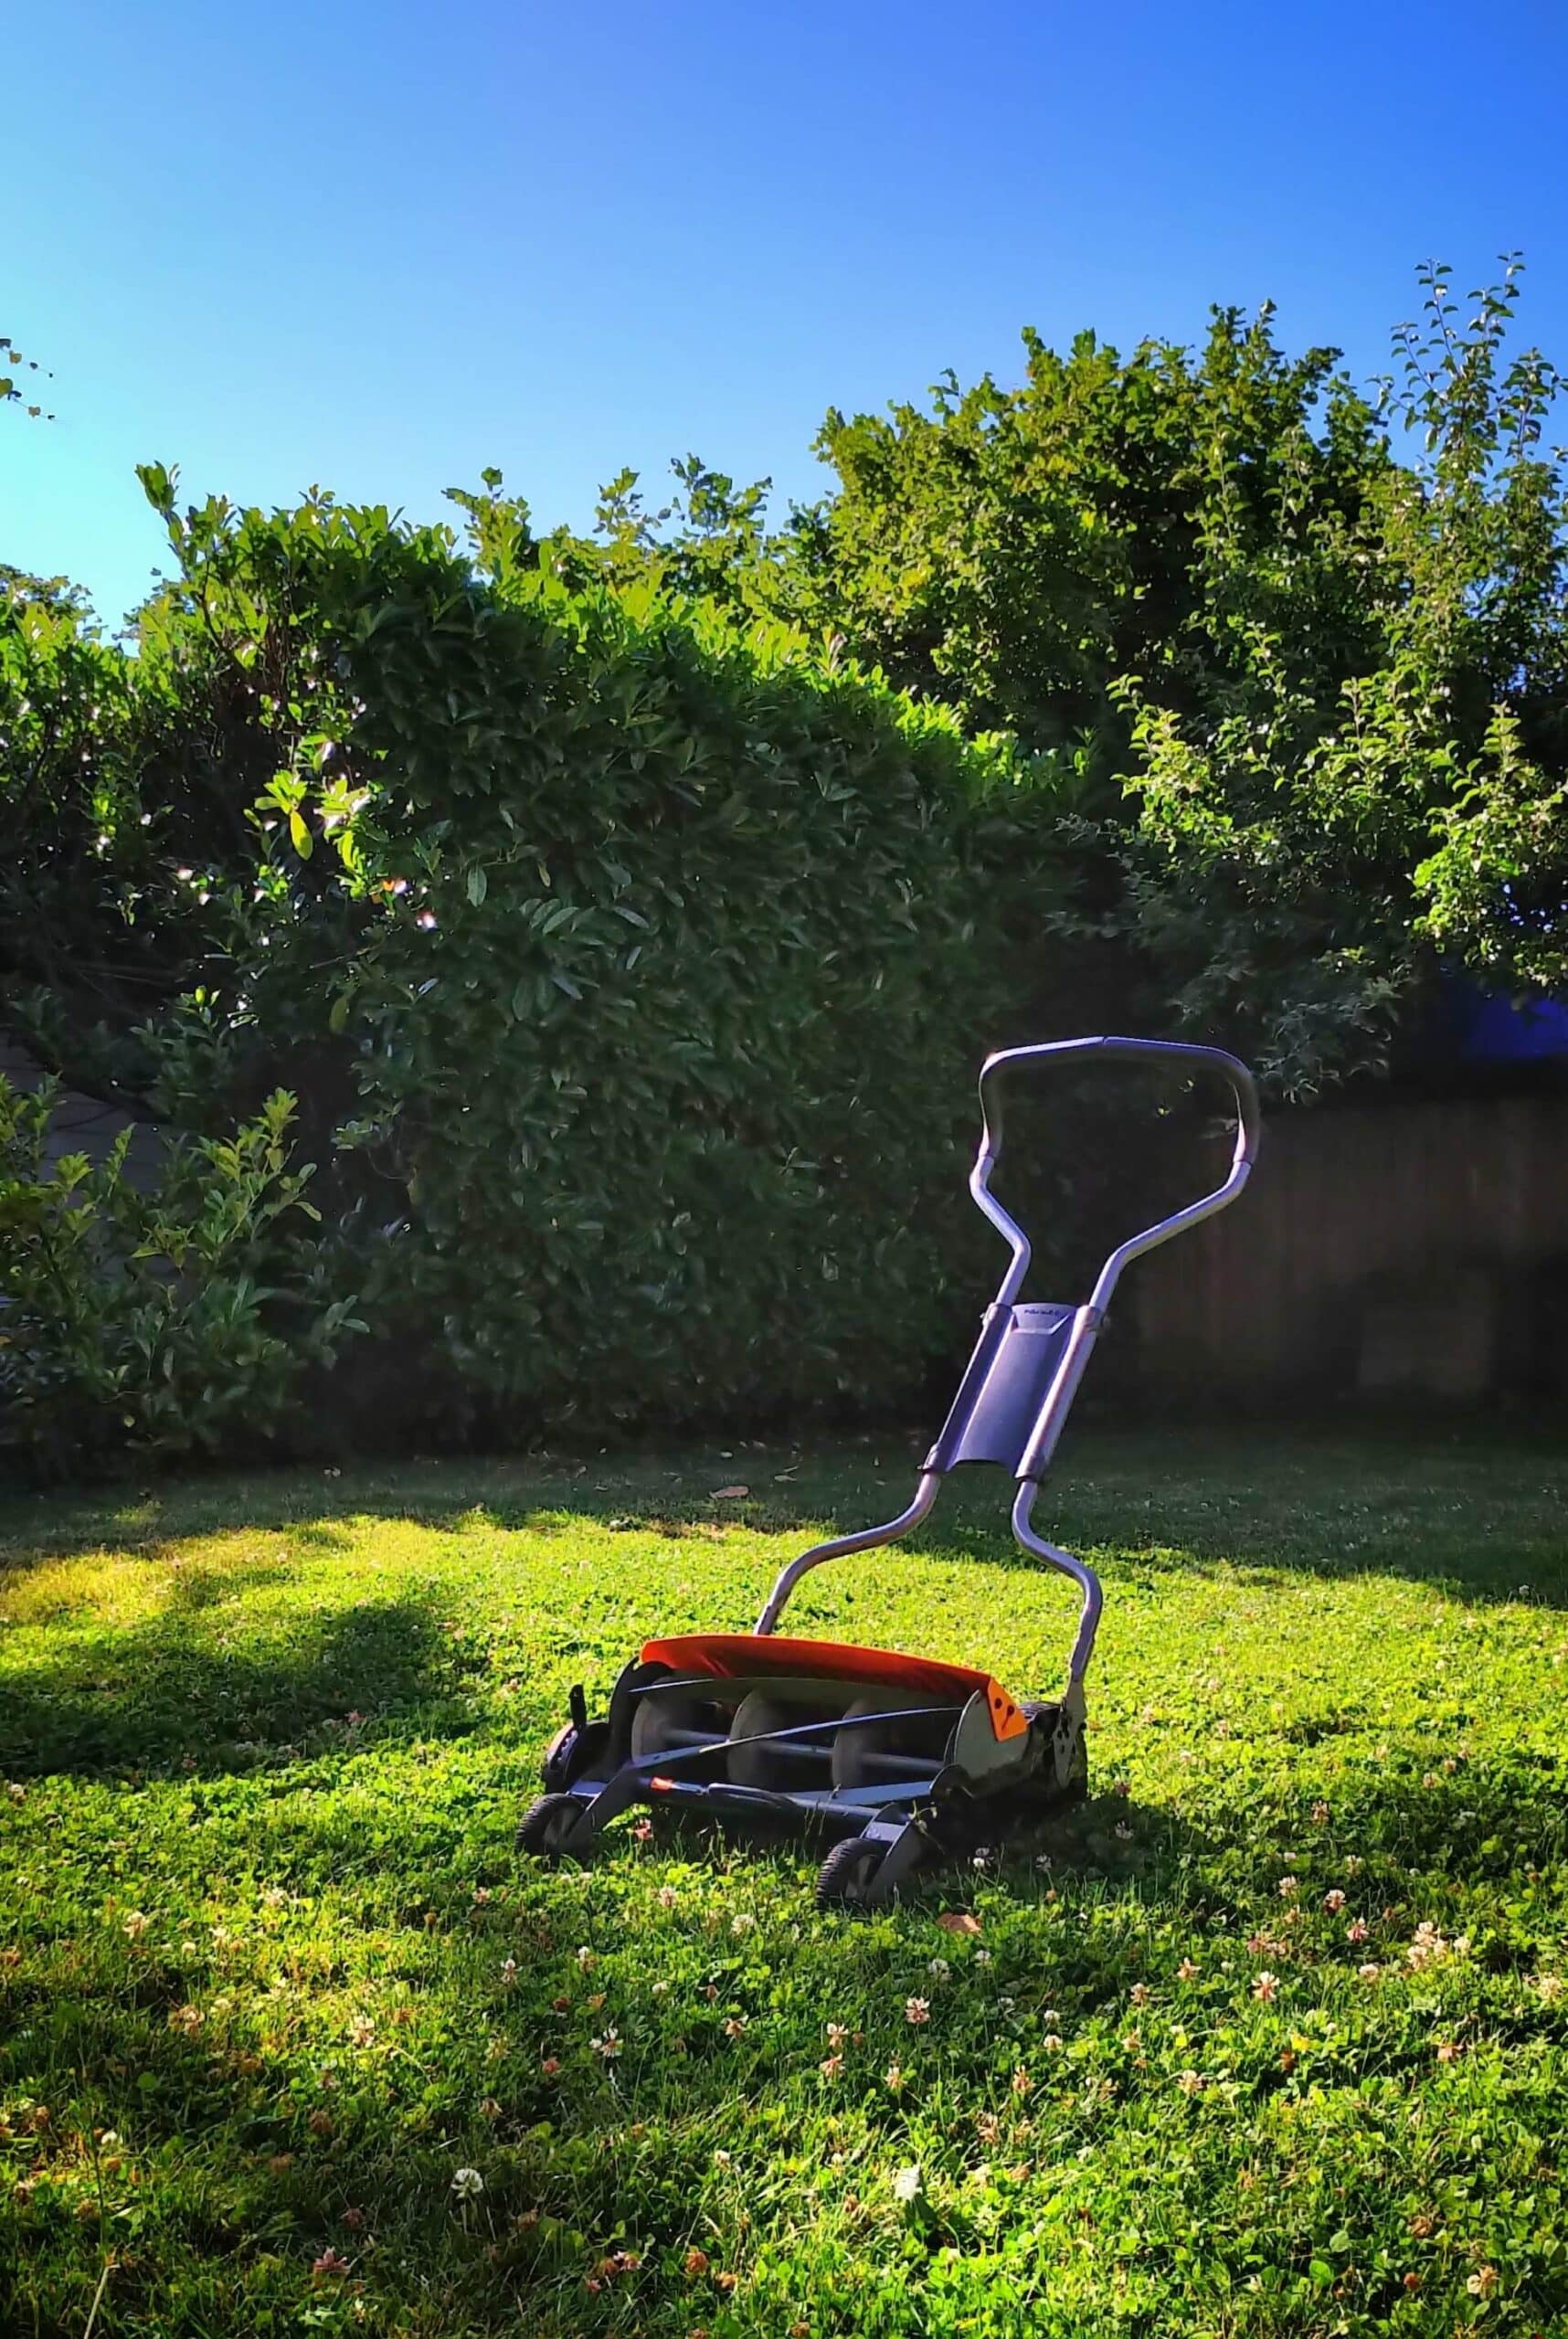 A lawn mower used over an organic lawn with bushes in the background